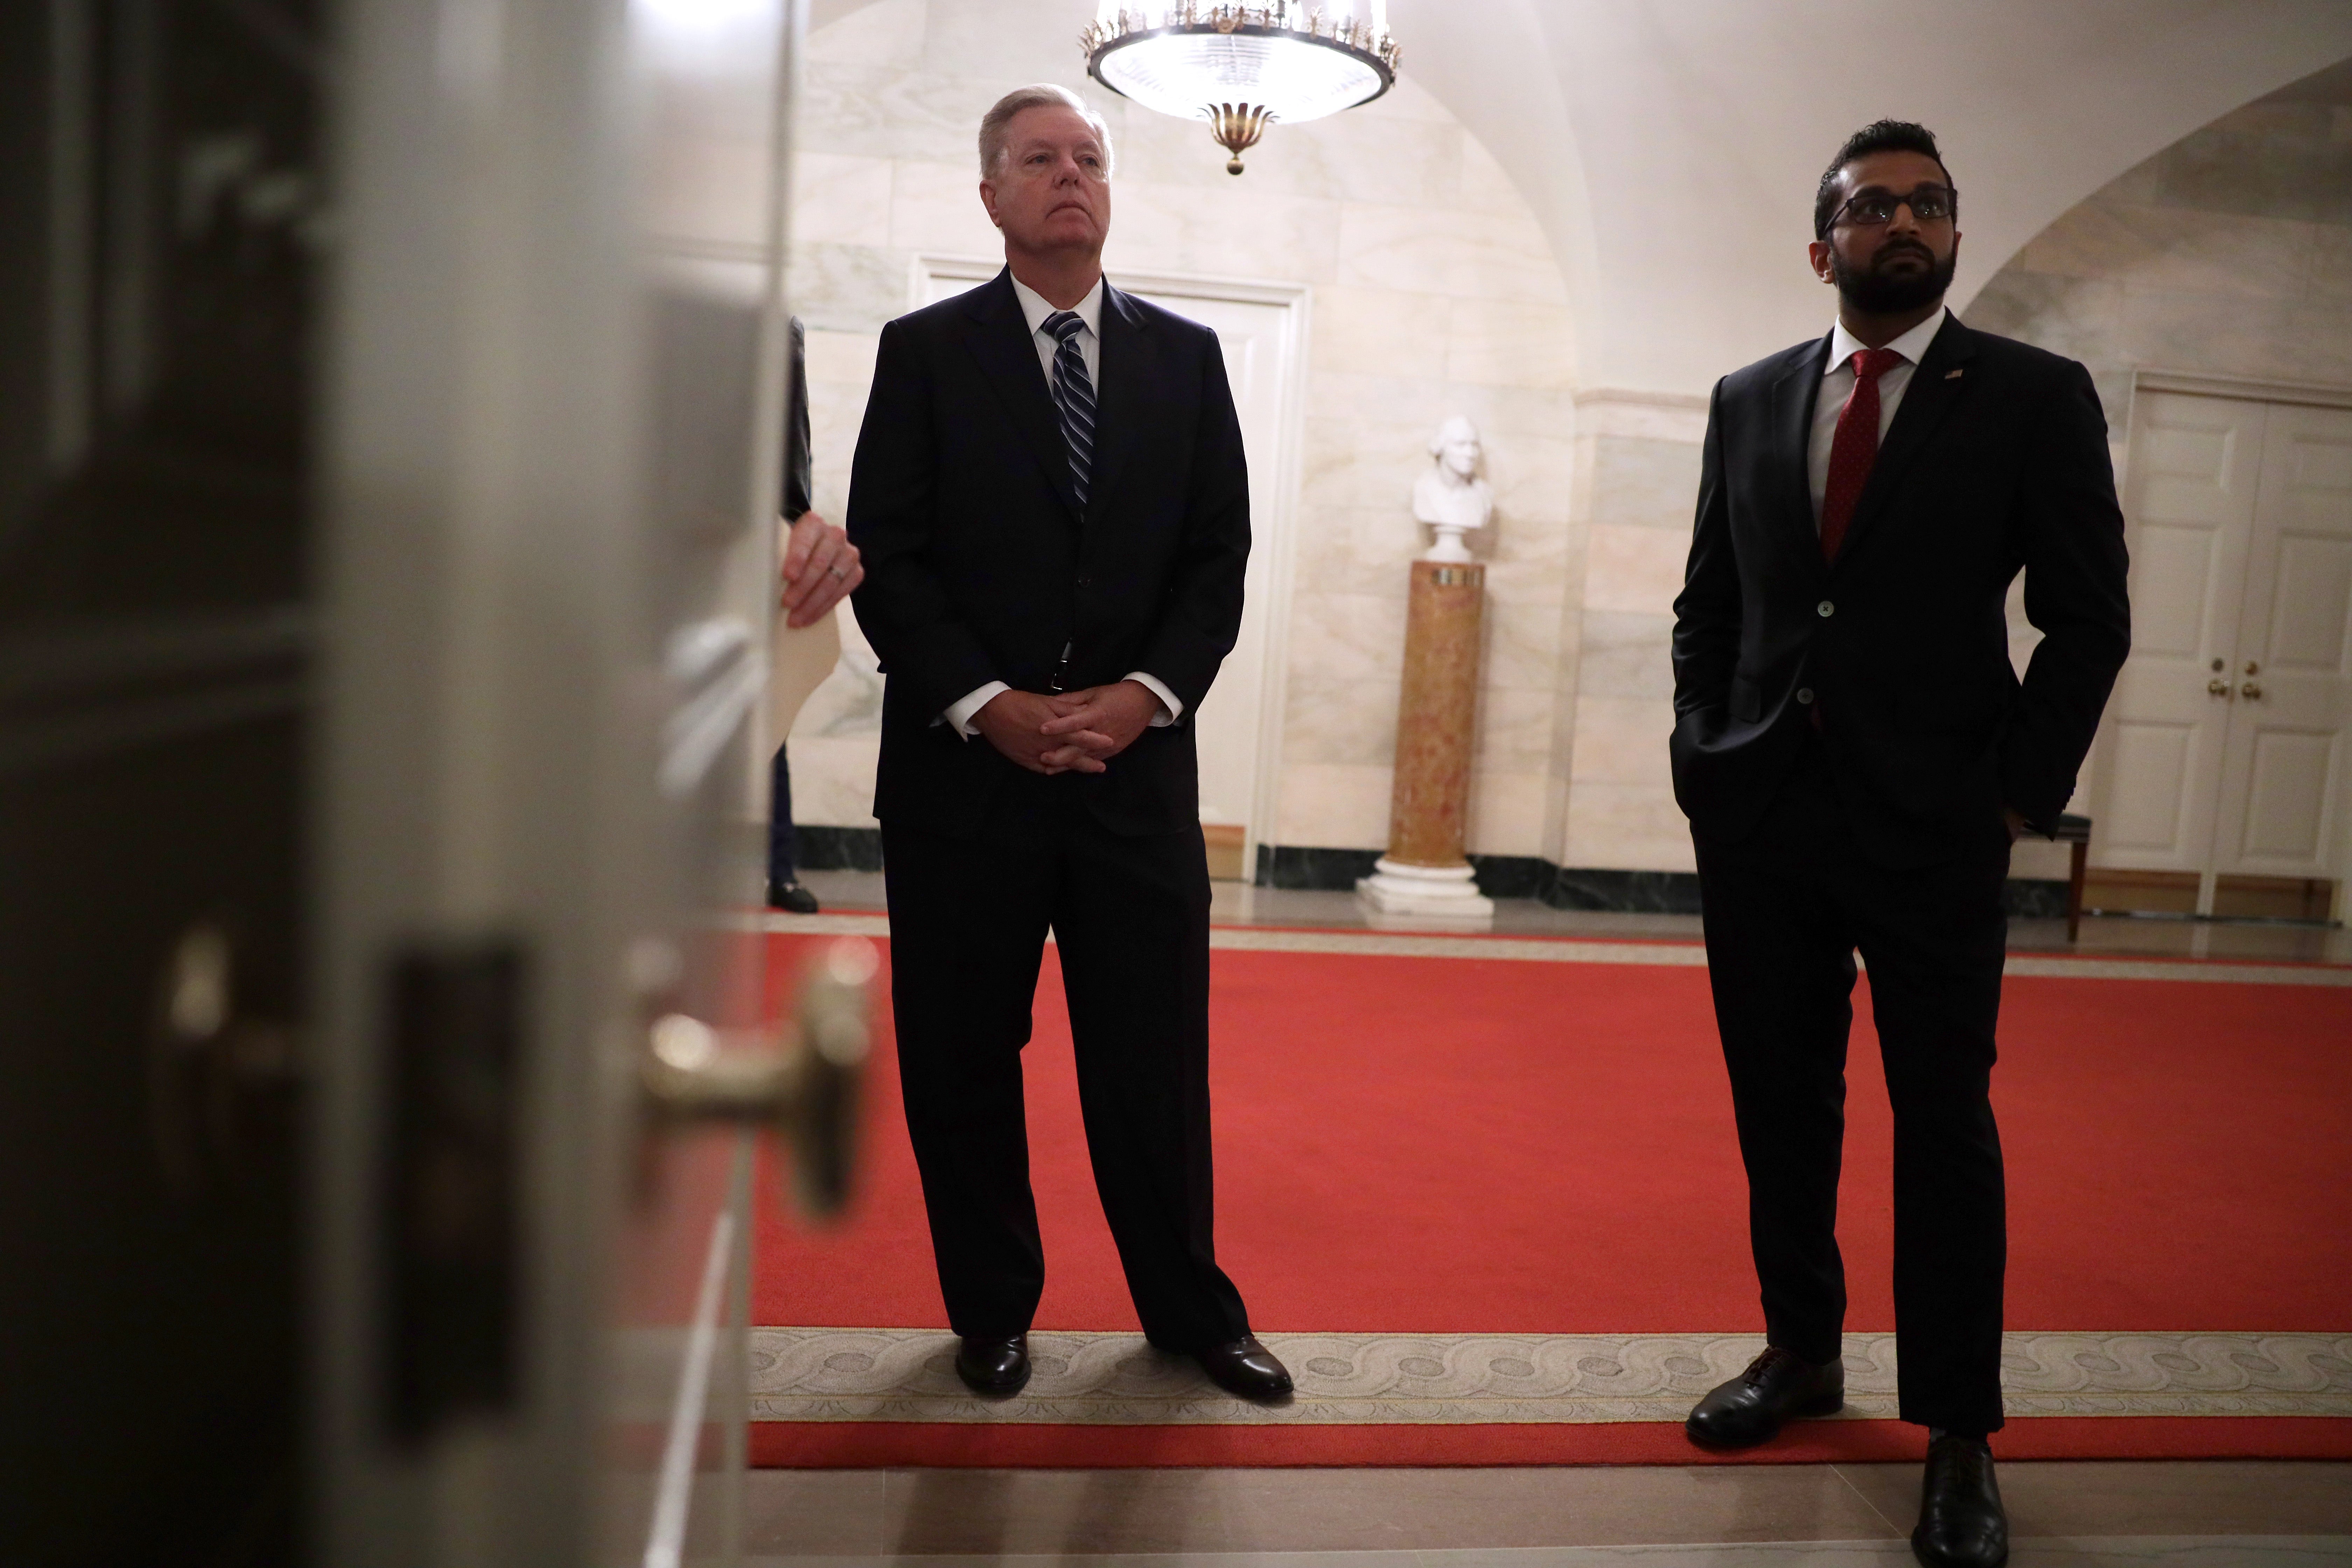 US Senator Lindsey Graham (left) and Kashyap “Kash” Pramod Patel (right) listen as &nbsp;Donald Trump makes a statement in the White House on October 27, 2019&nbsp;